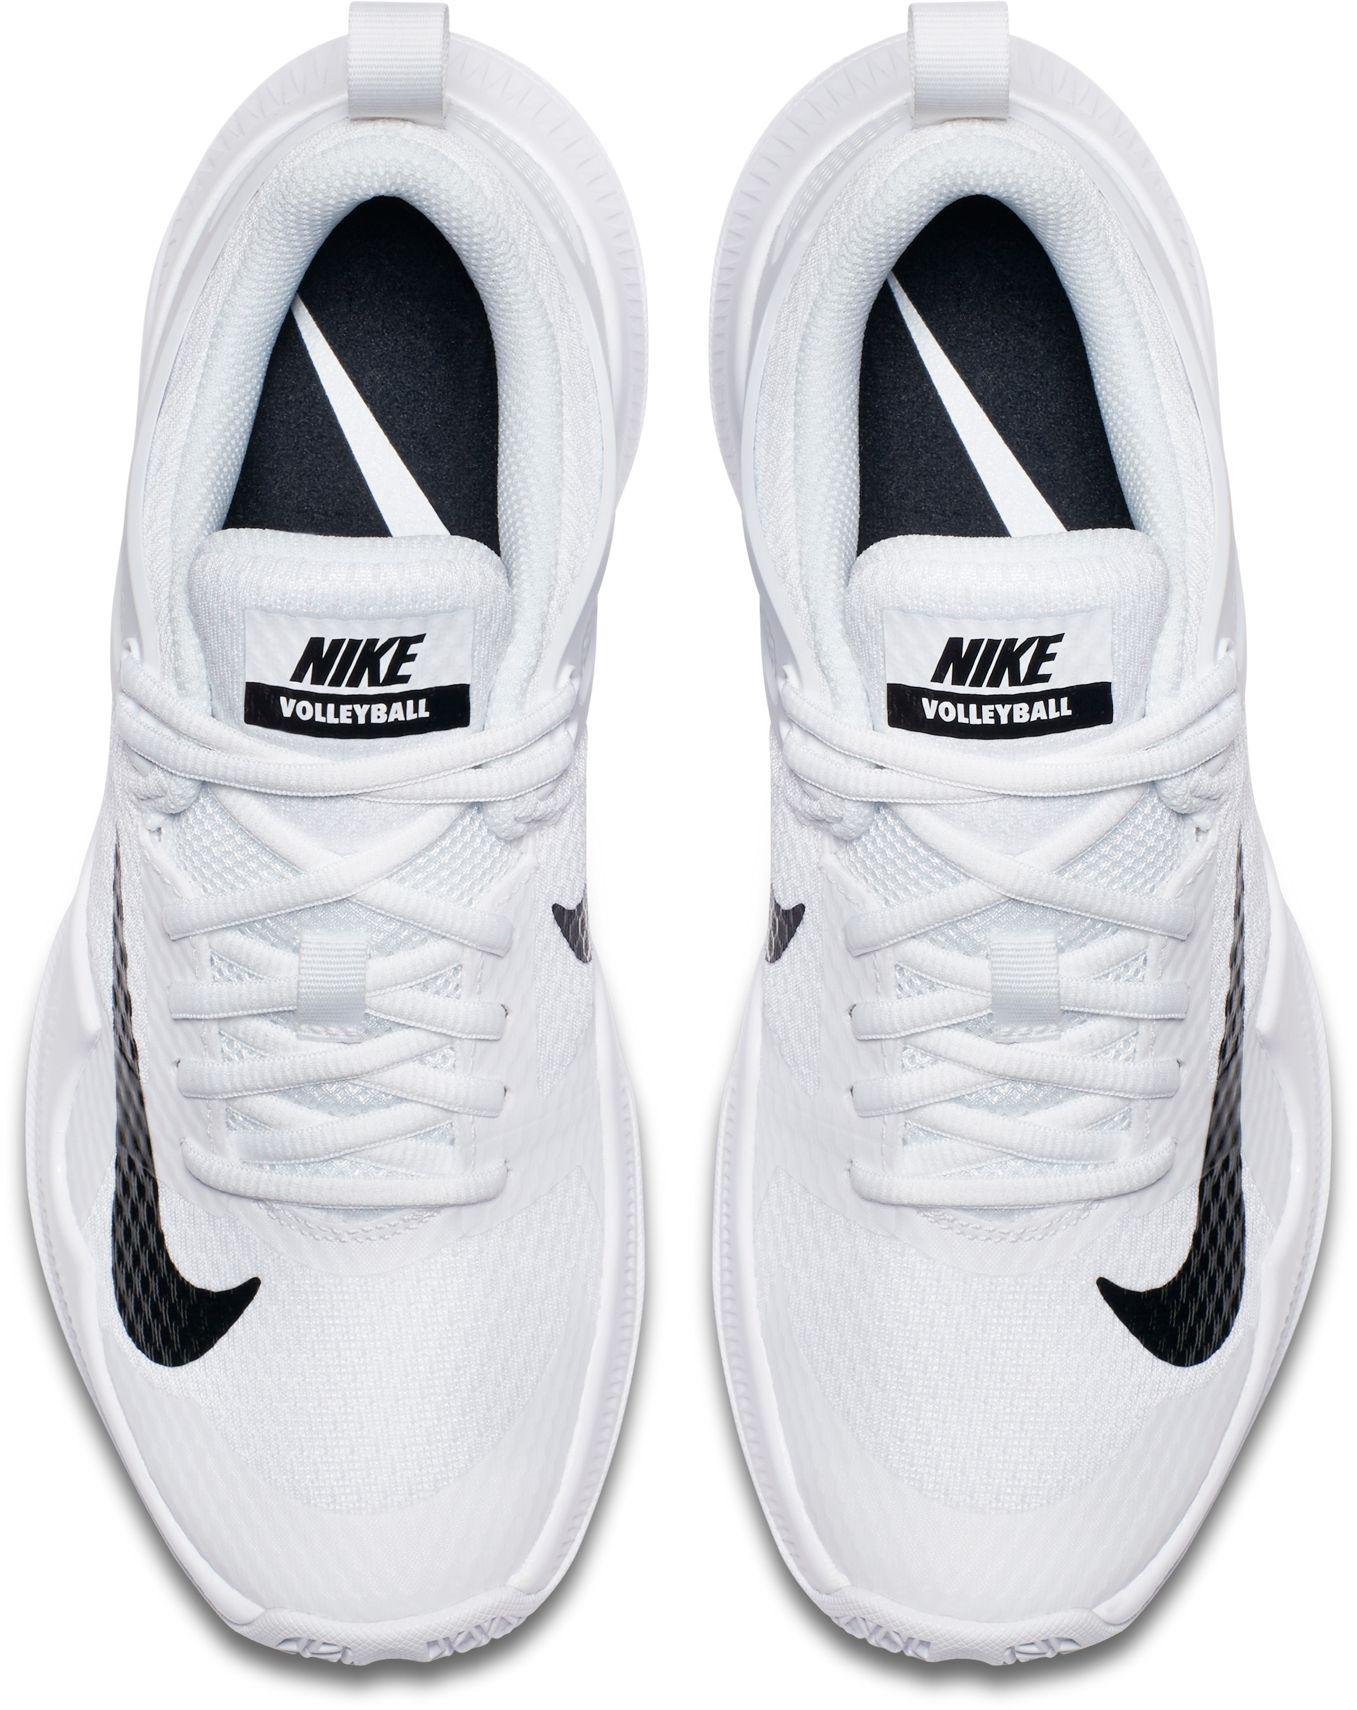 Nike WhiteBlack Air Zoom Hyperace Volleyball Shoes 